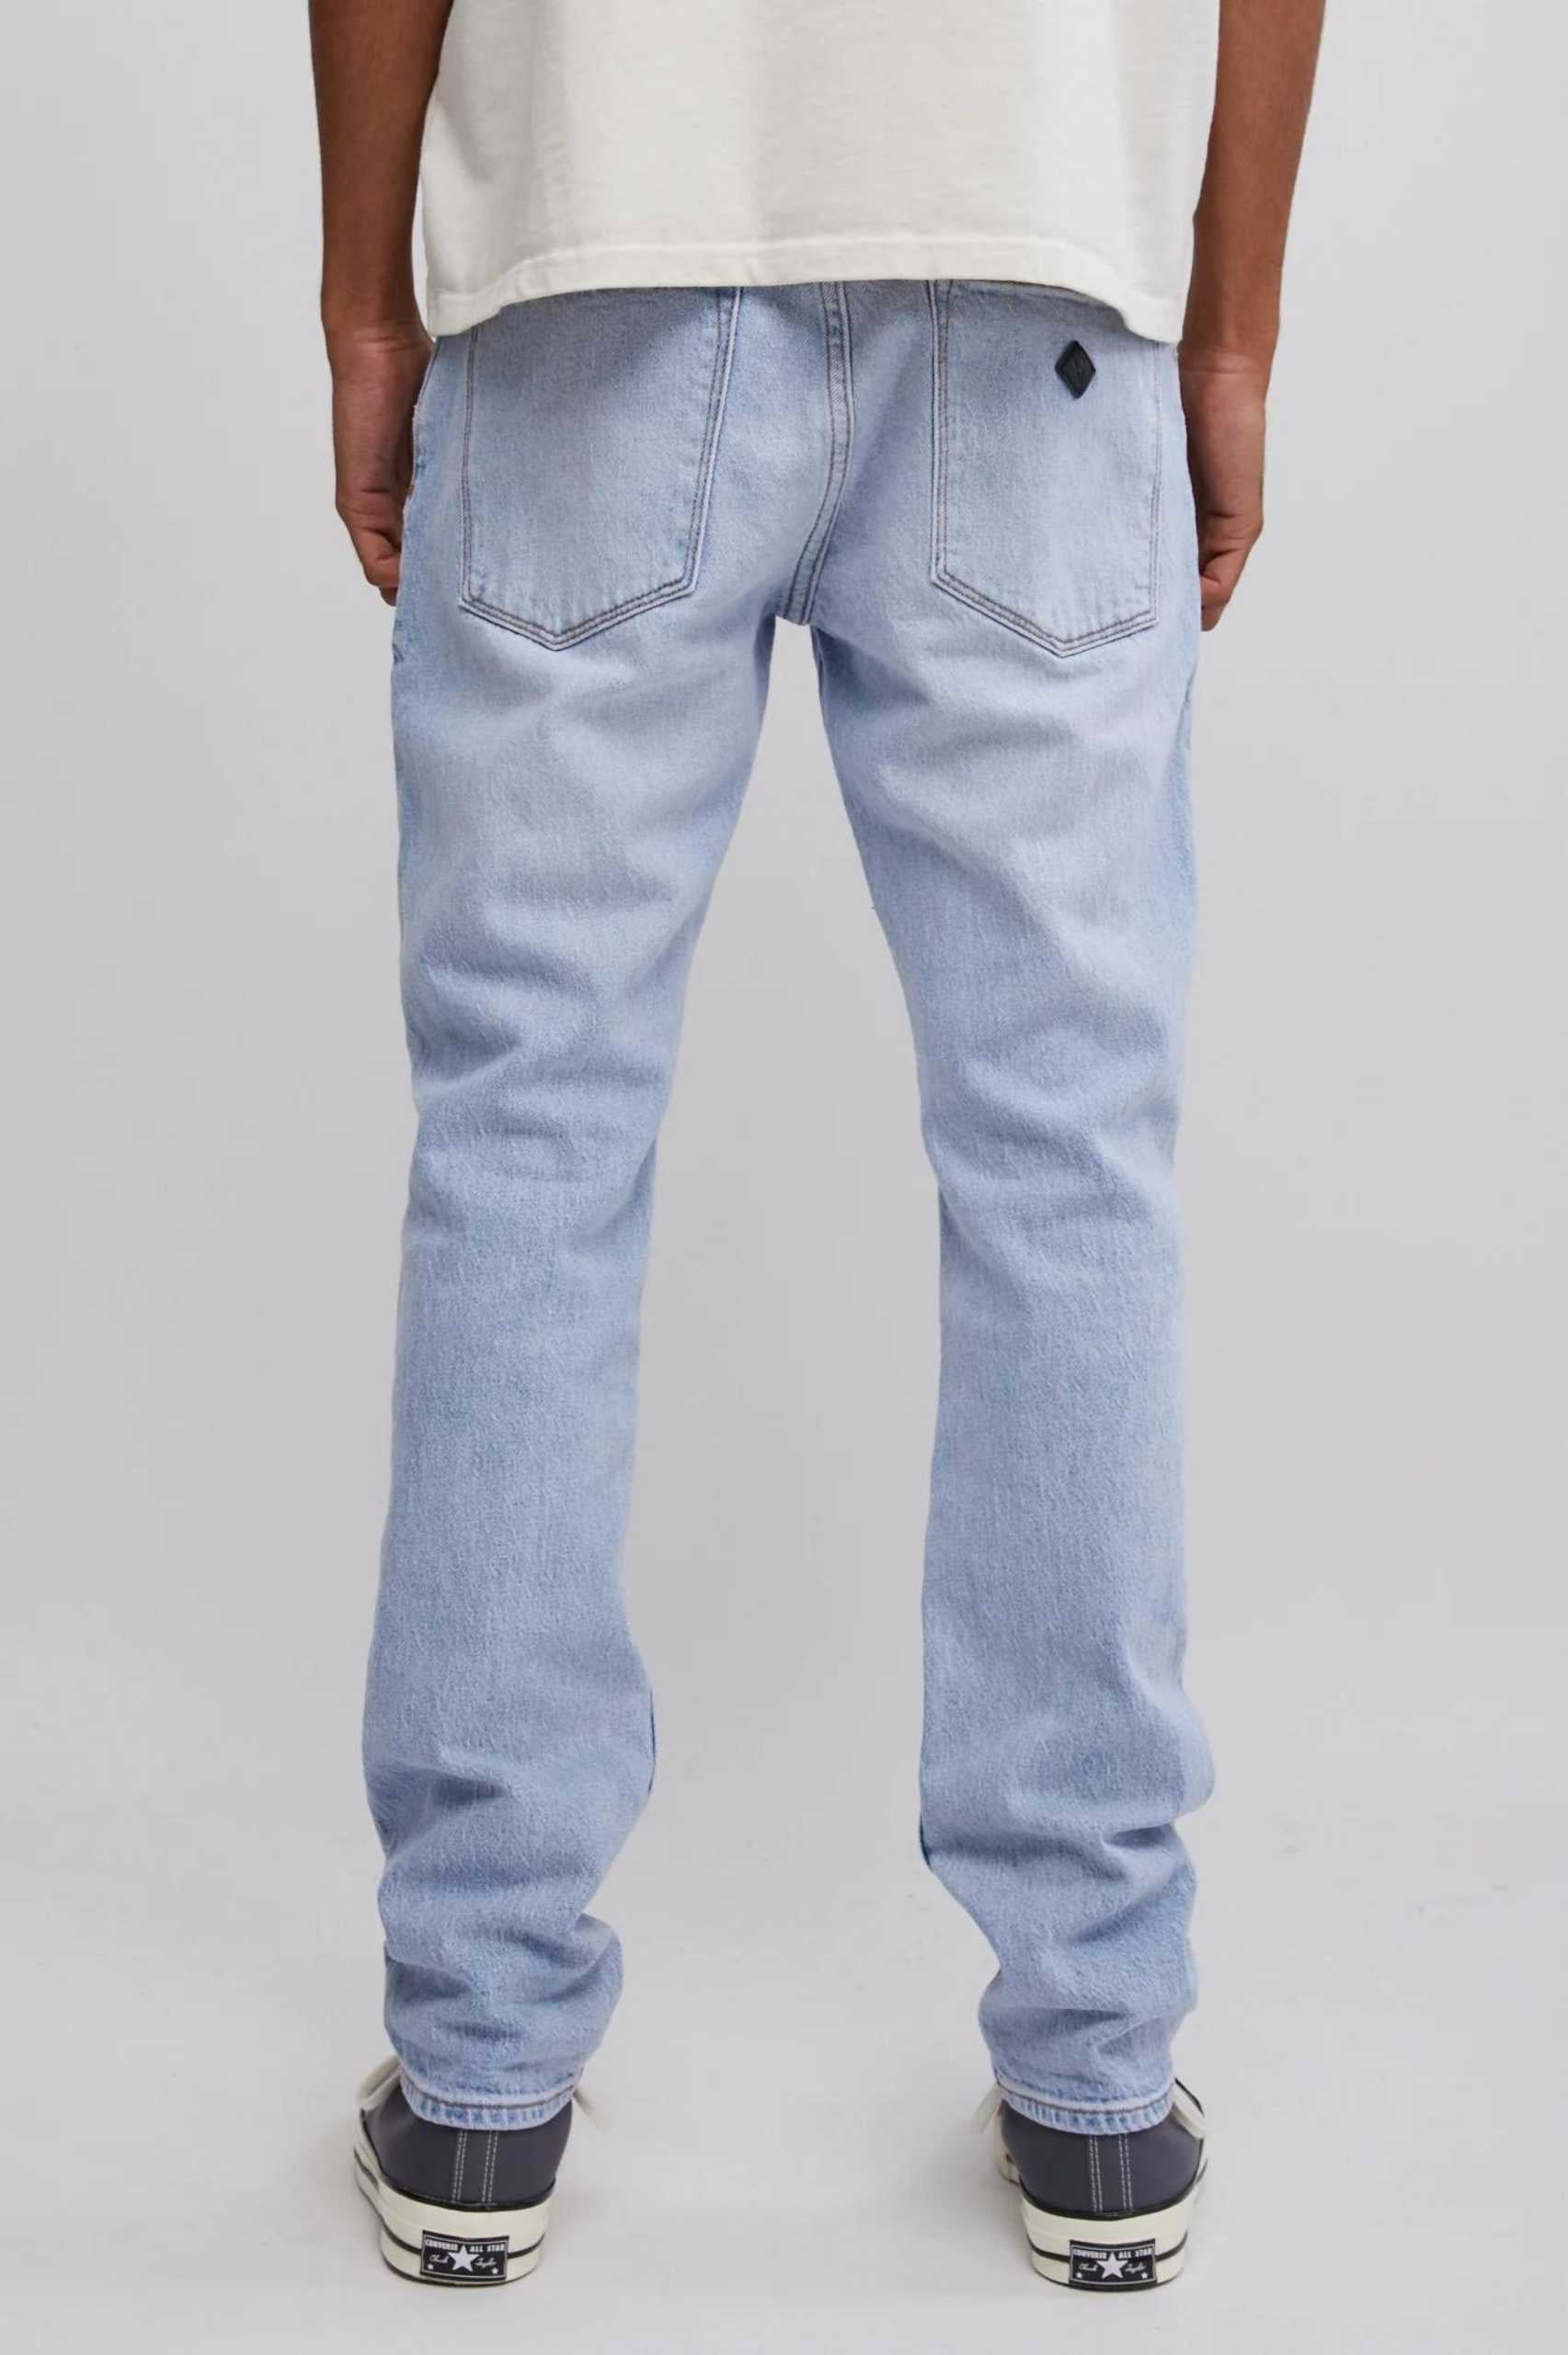 Abrand Mens A Slim Sessions Jean in Bleached Vintage Blue